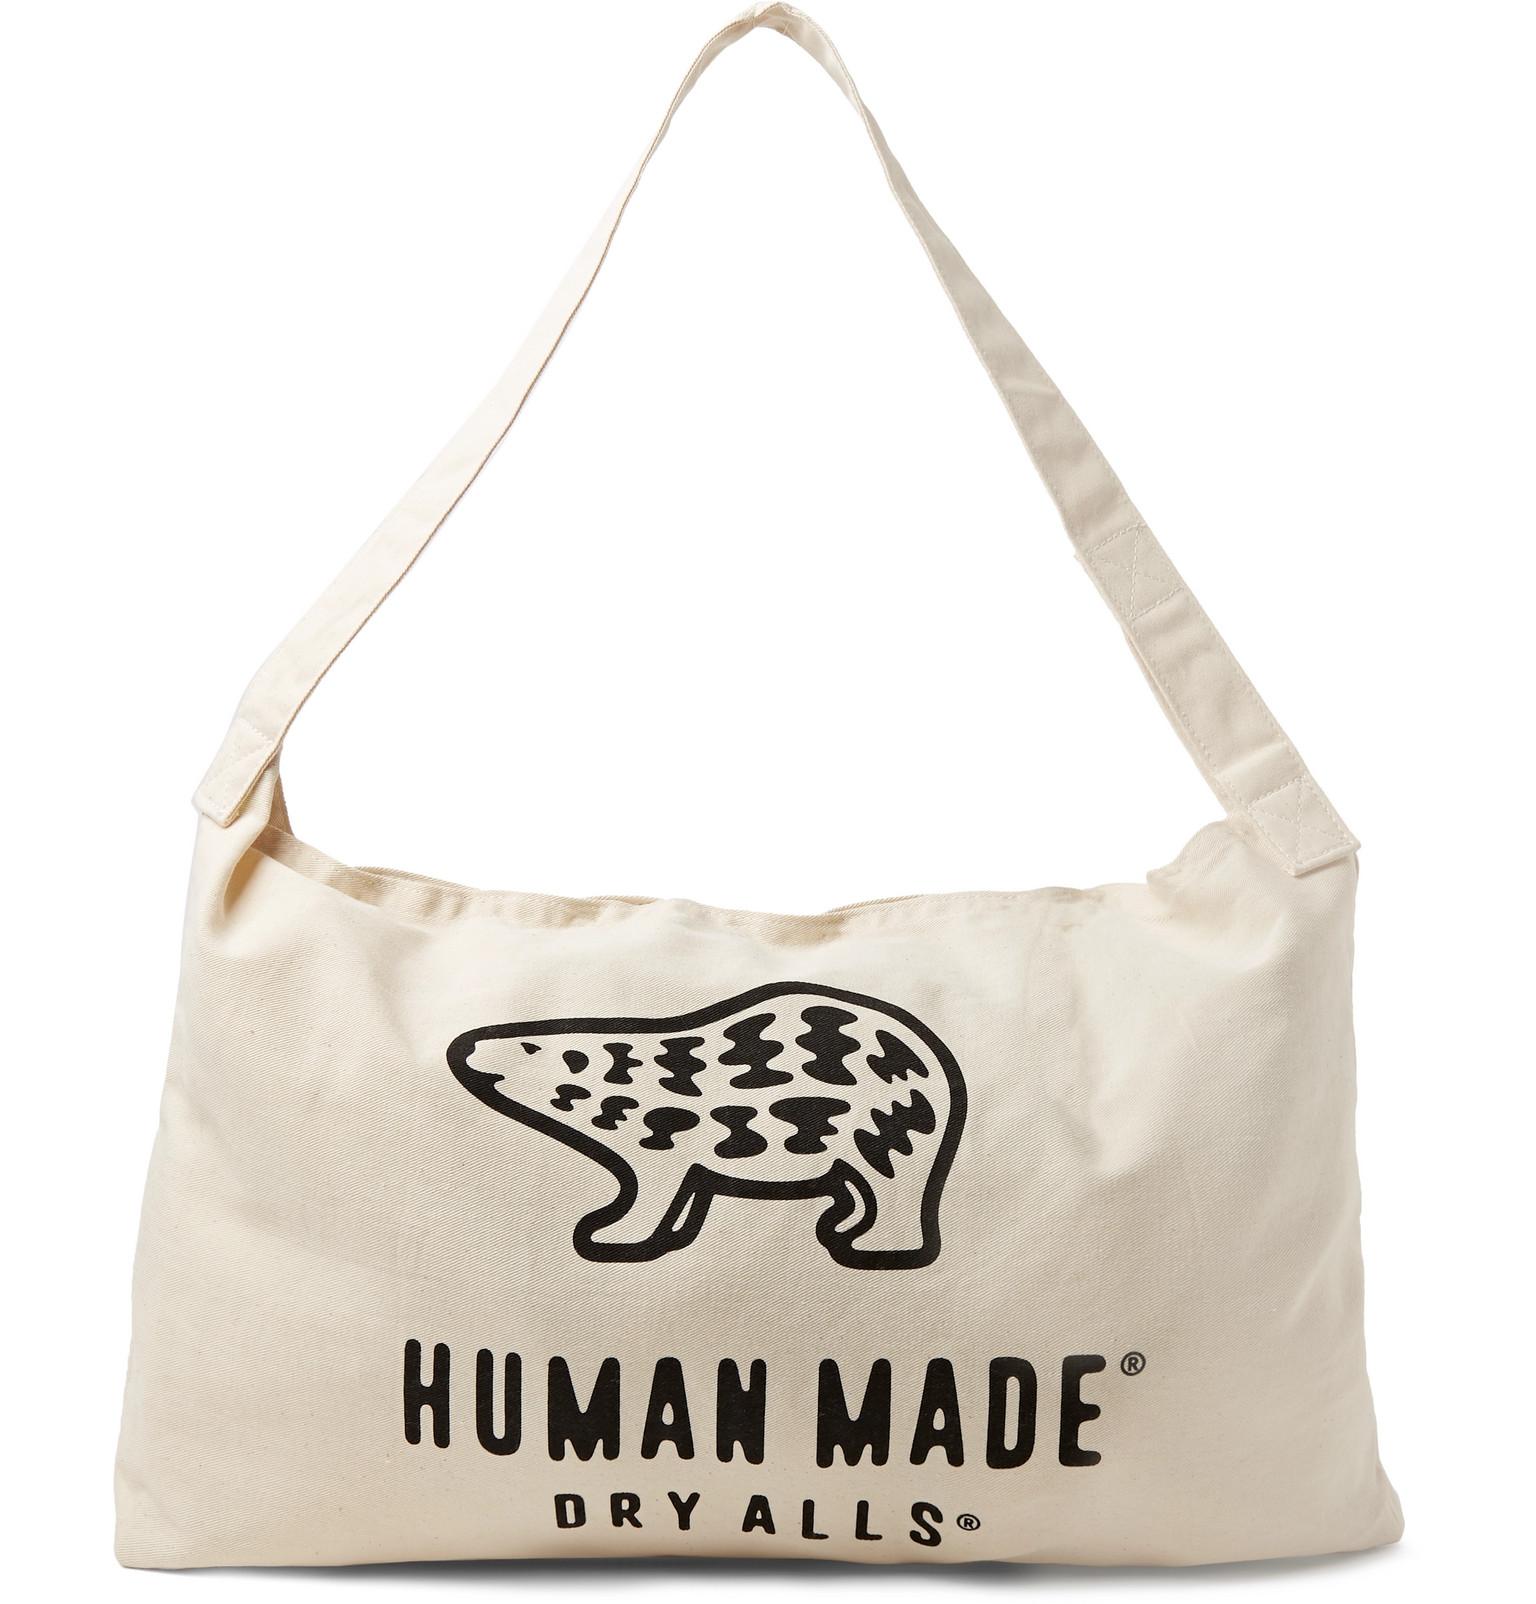 Human made COTTON CANVAS BACKPACK